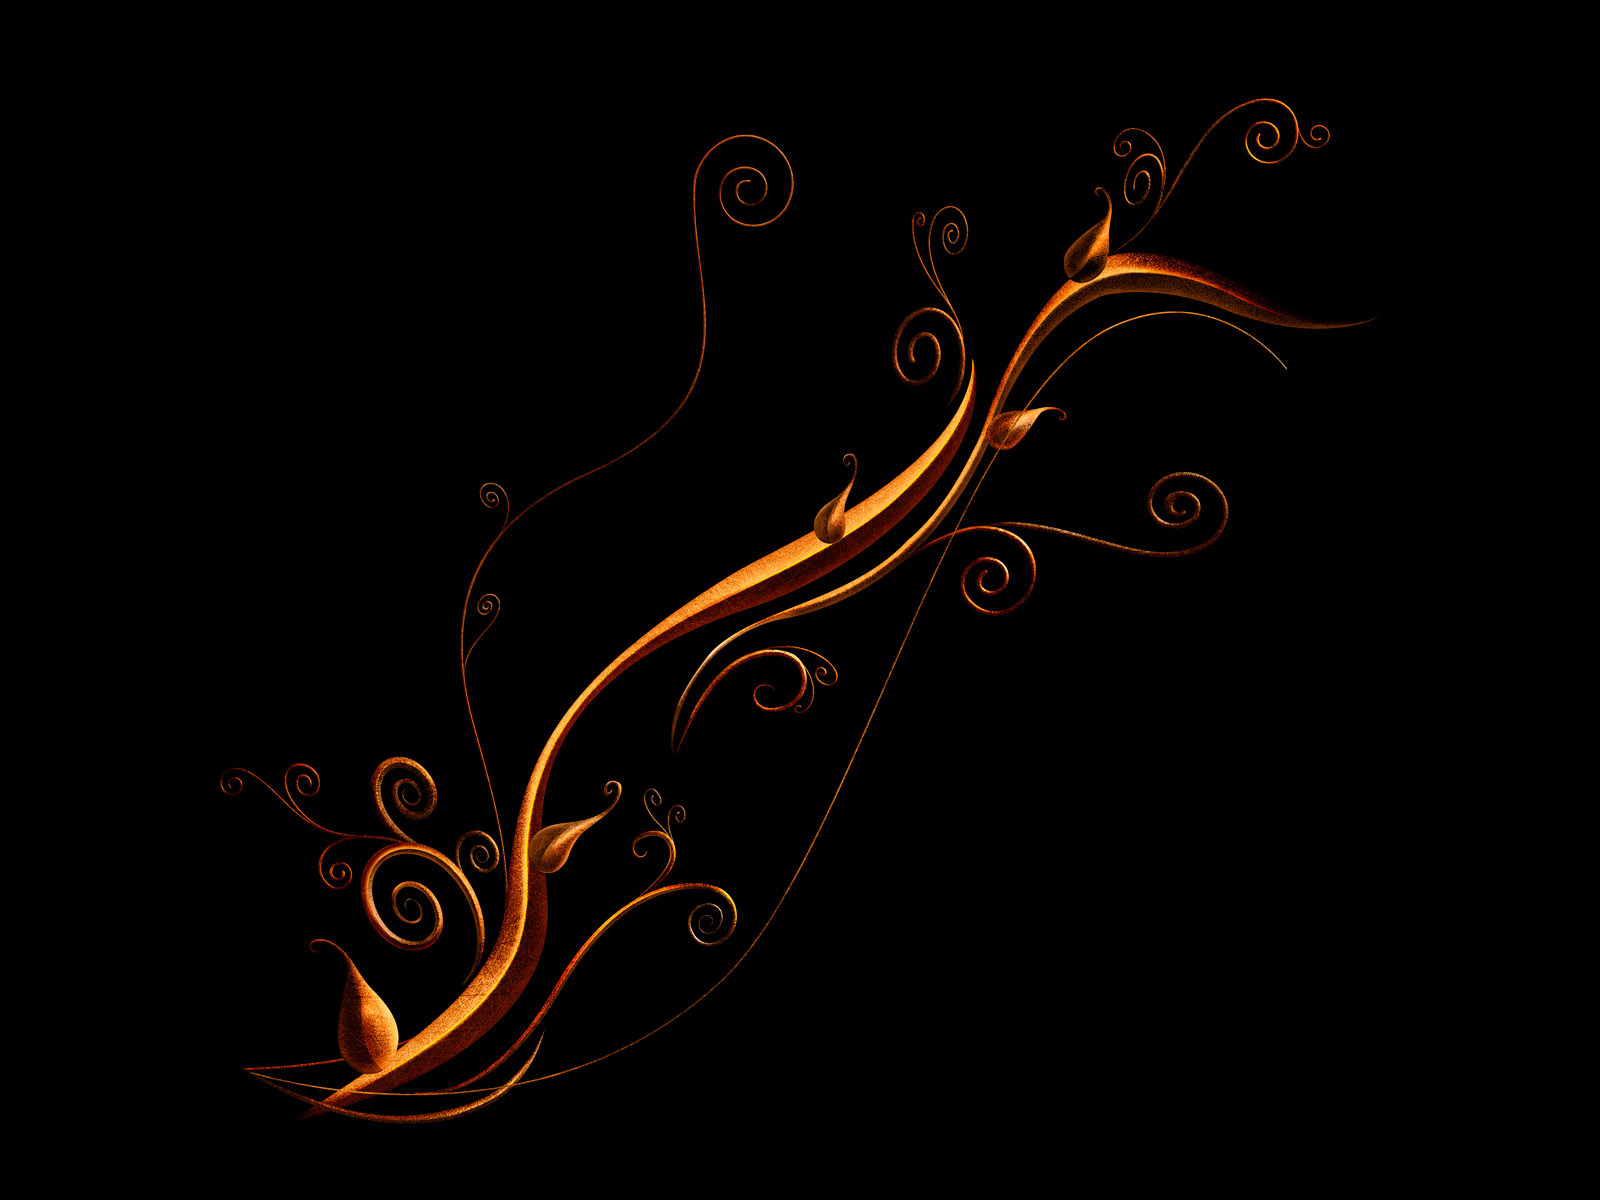 10686 download free Black wallpapers for computer, background, abstract Black pictures and backgrounds for desktop